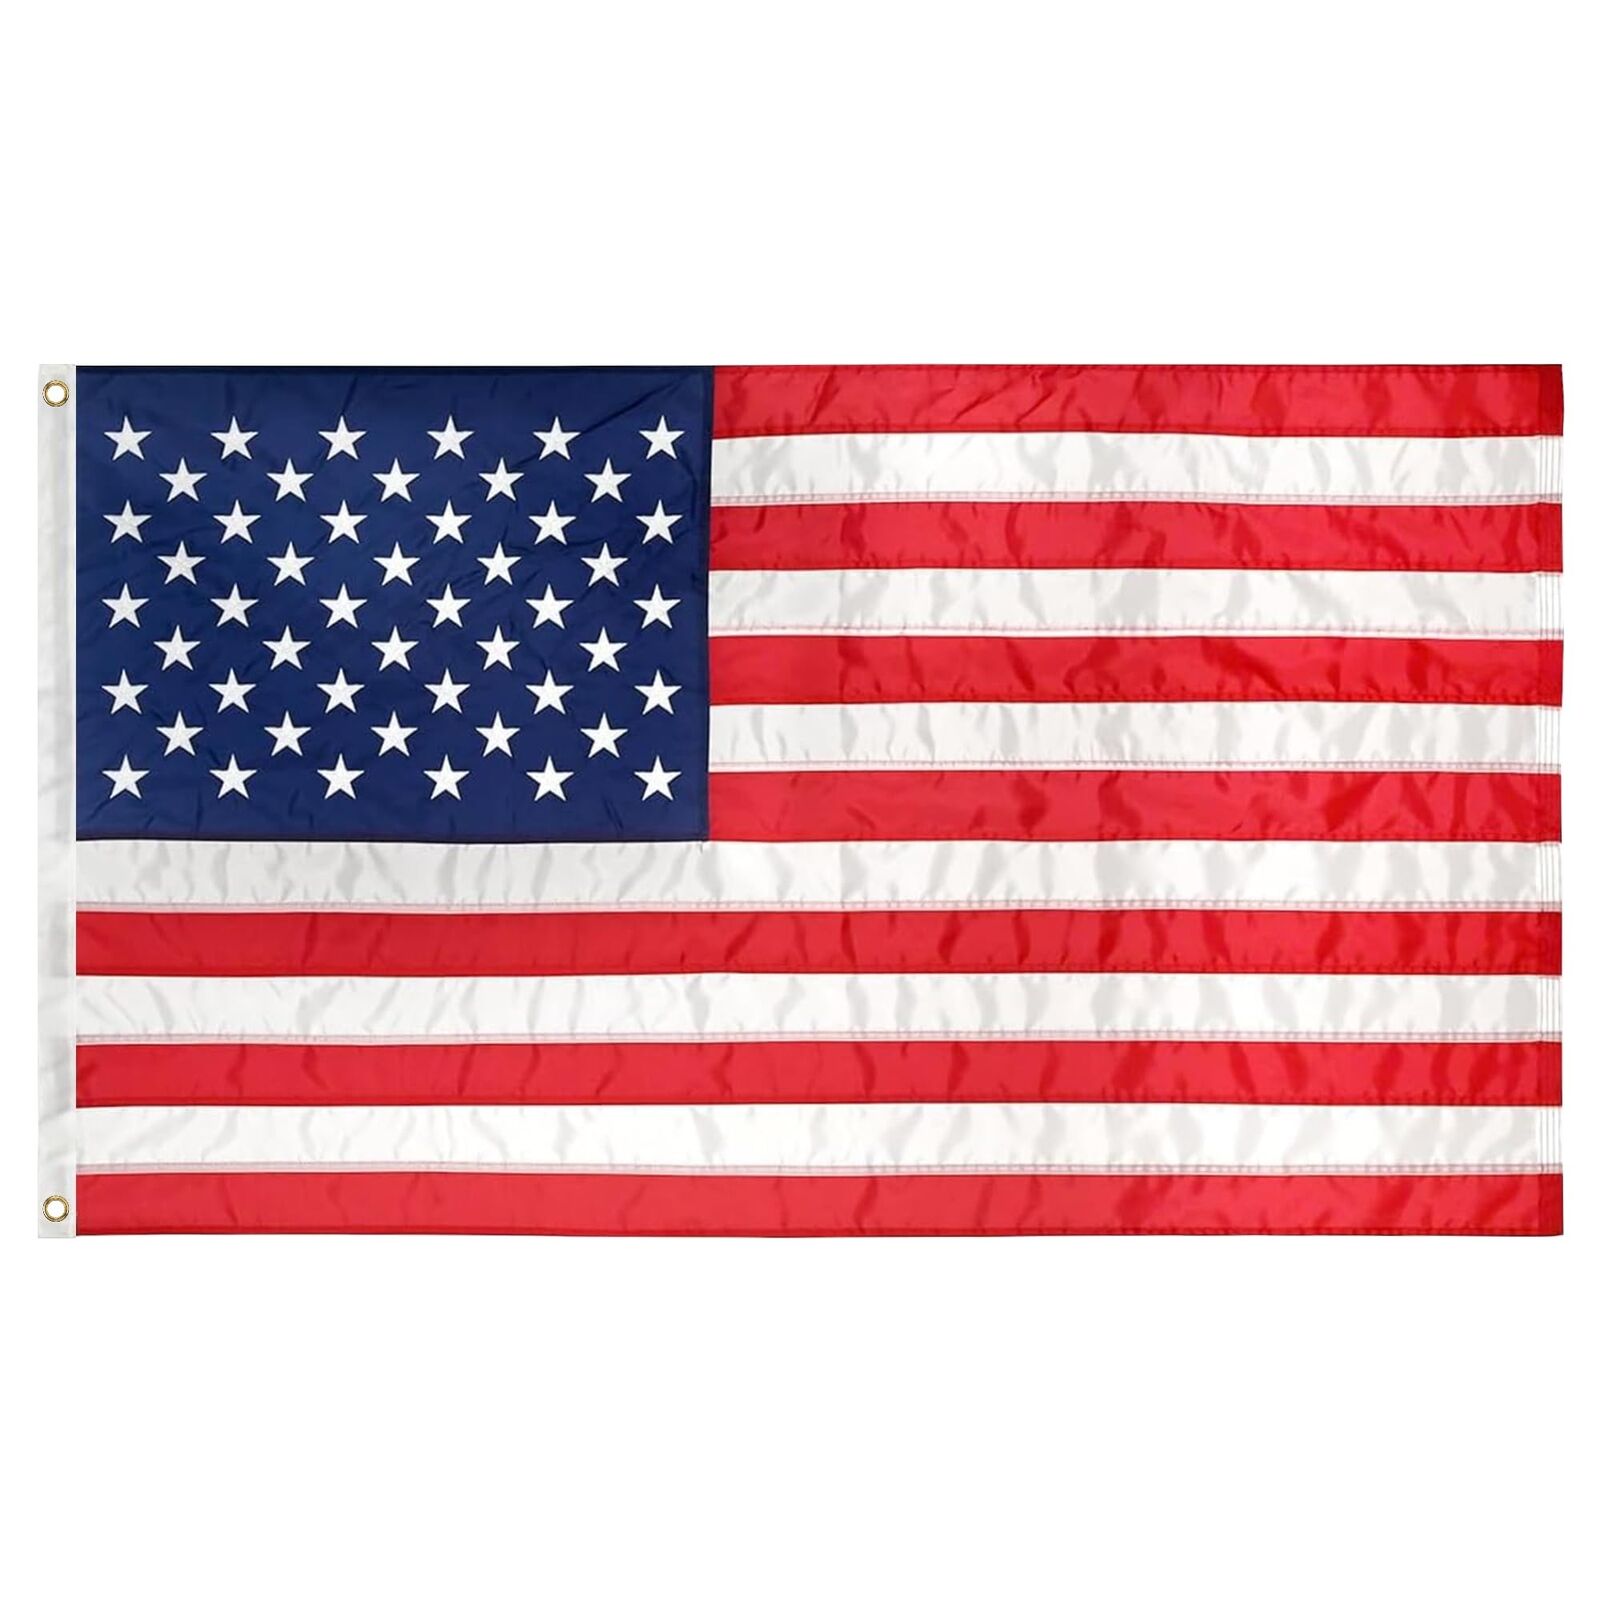 3Ft x 5Ft American Flag - Heavy Duty Polyester USA Flag with Embroidered Star...